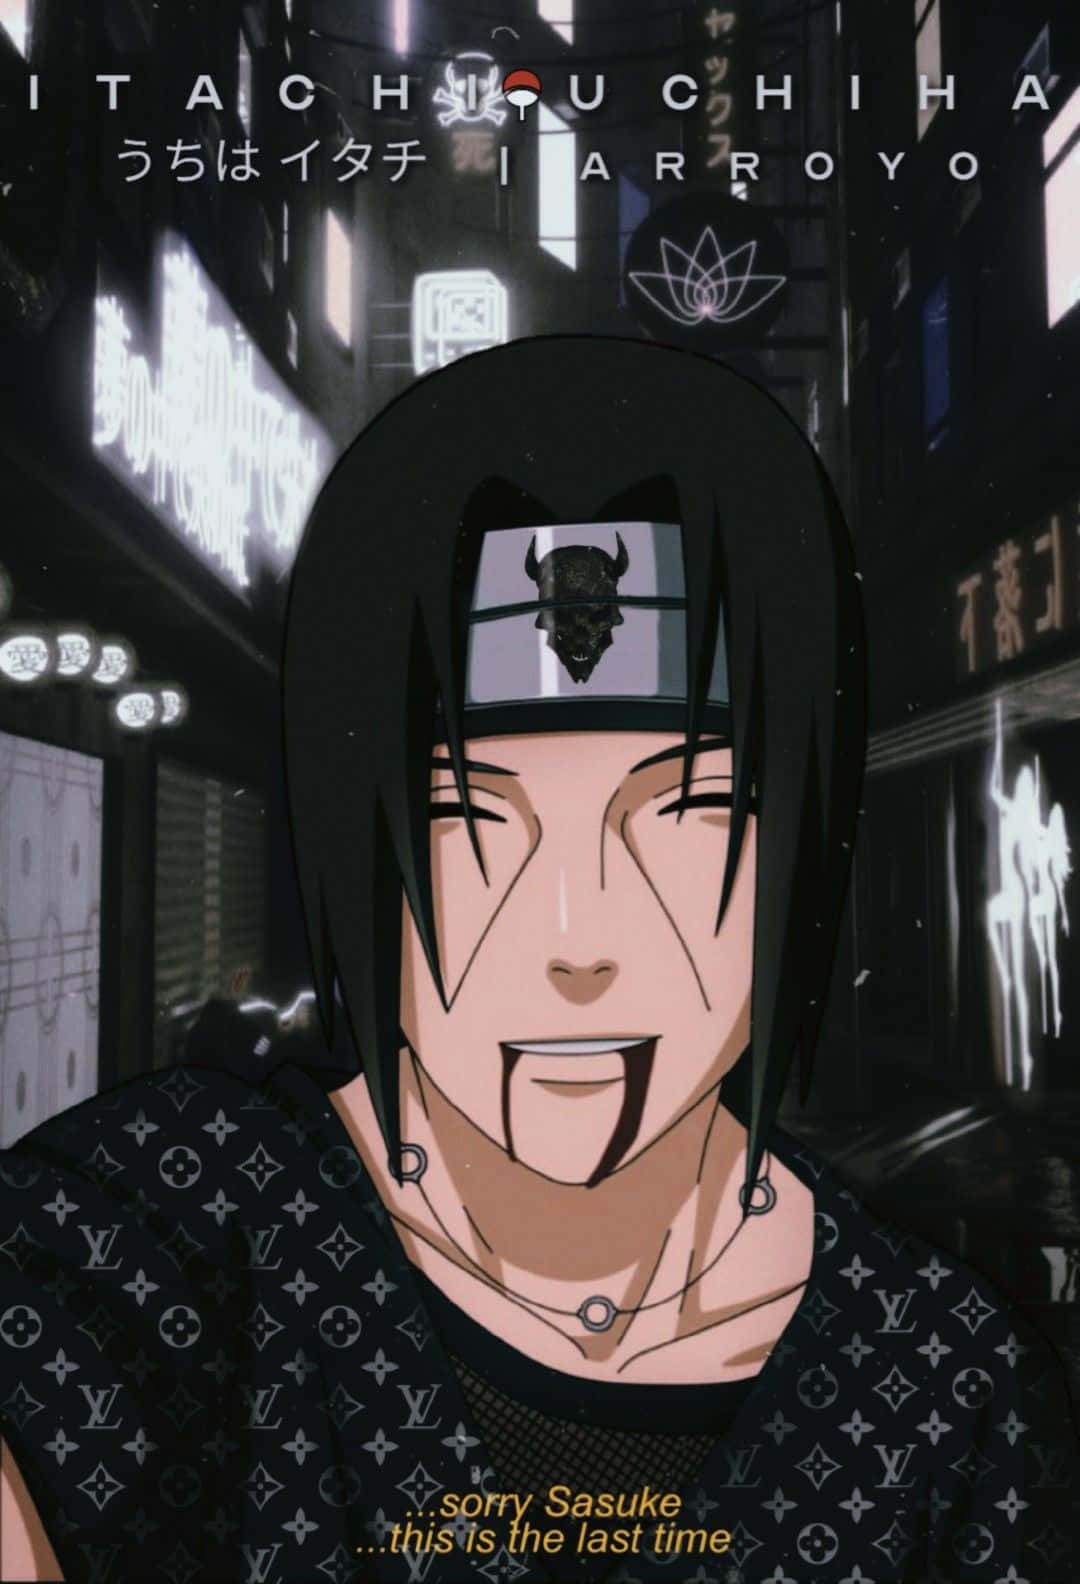 Itachi Aesthetic Blood Coming Out From Mouth While Apologizing To Sasuke Wallpaper